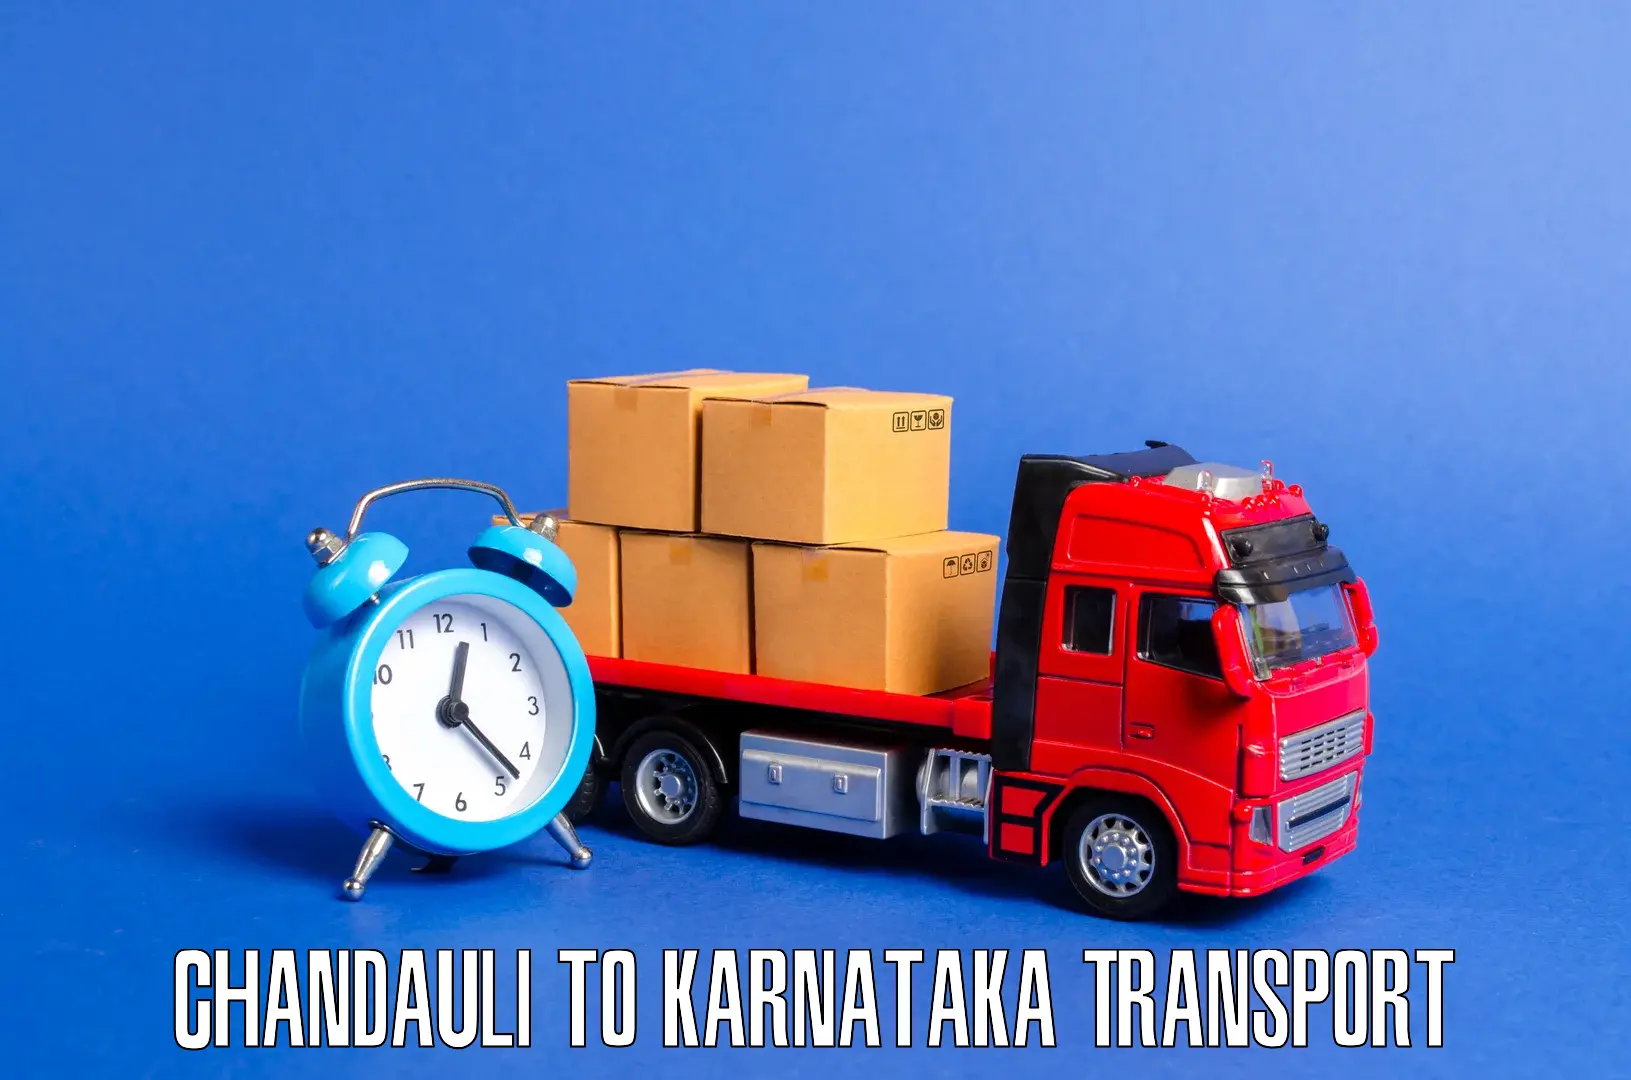 Commercial transport service Chandauli to Jagalur